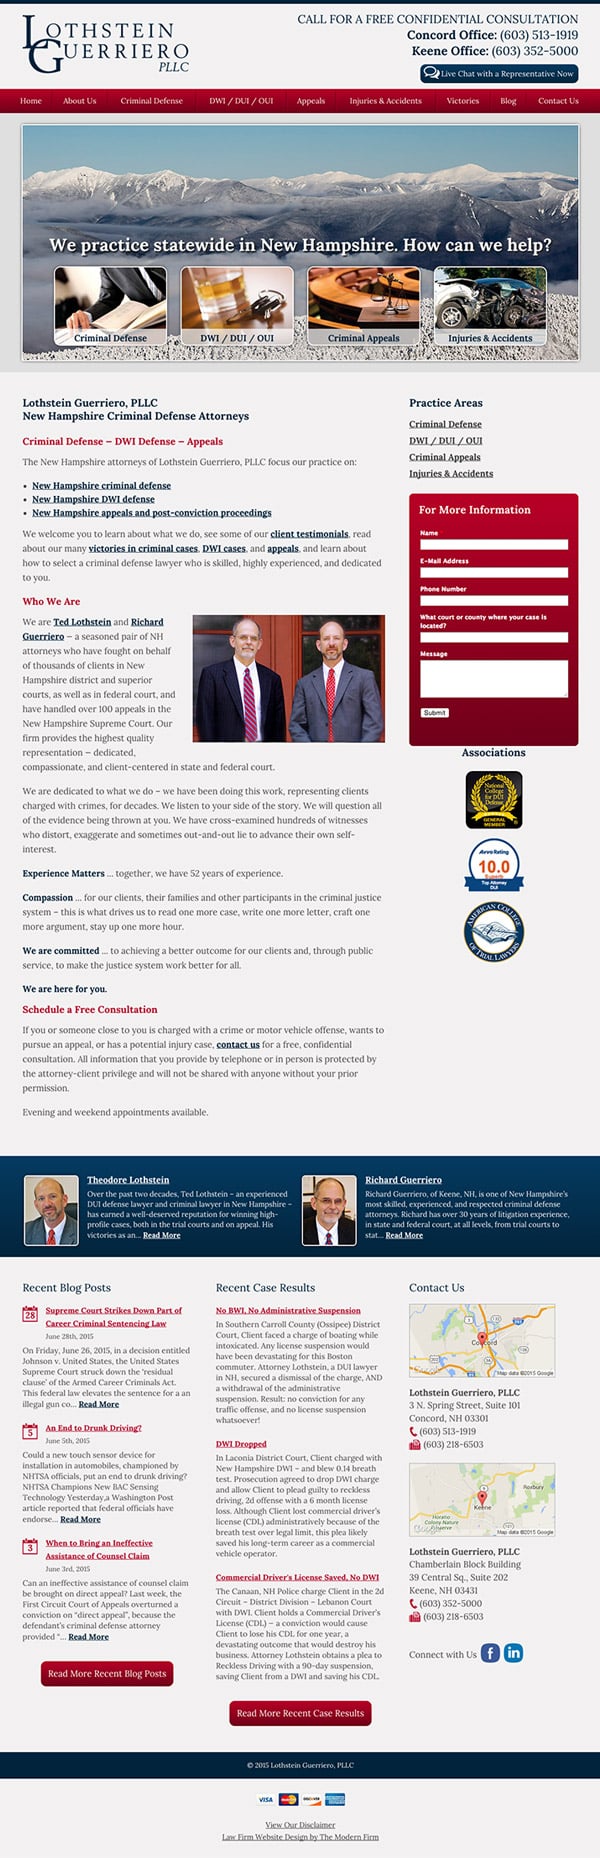 Law Firm Website Design for Lothstein Guerriero, PLLC